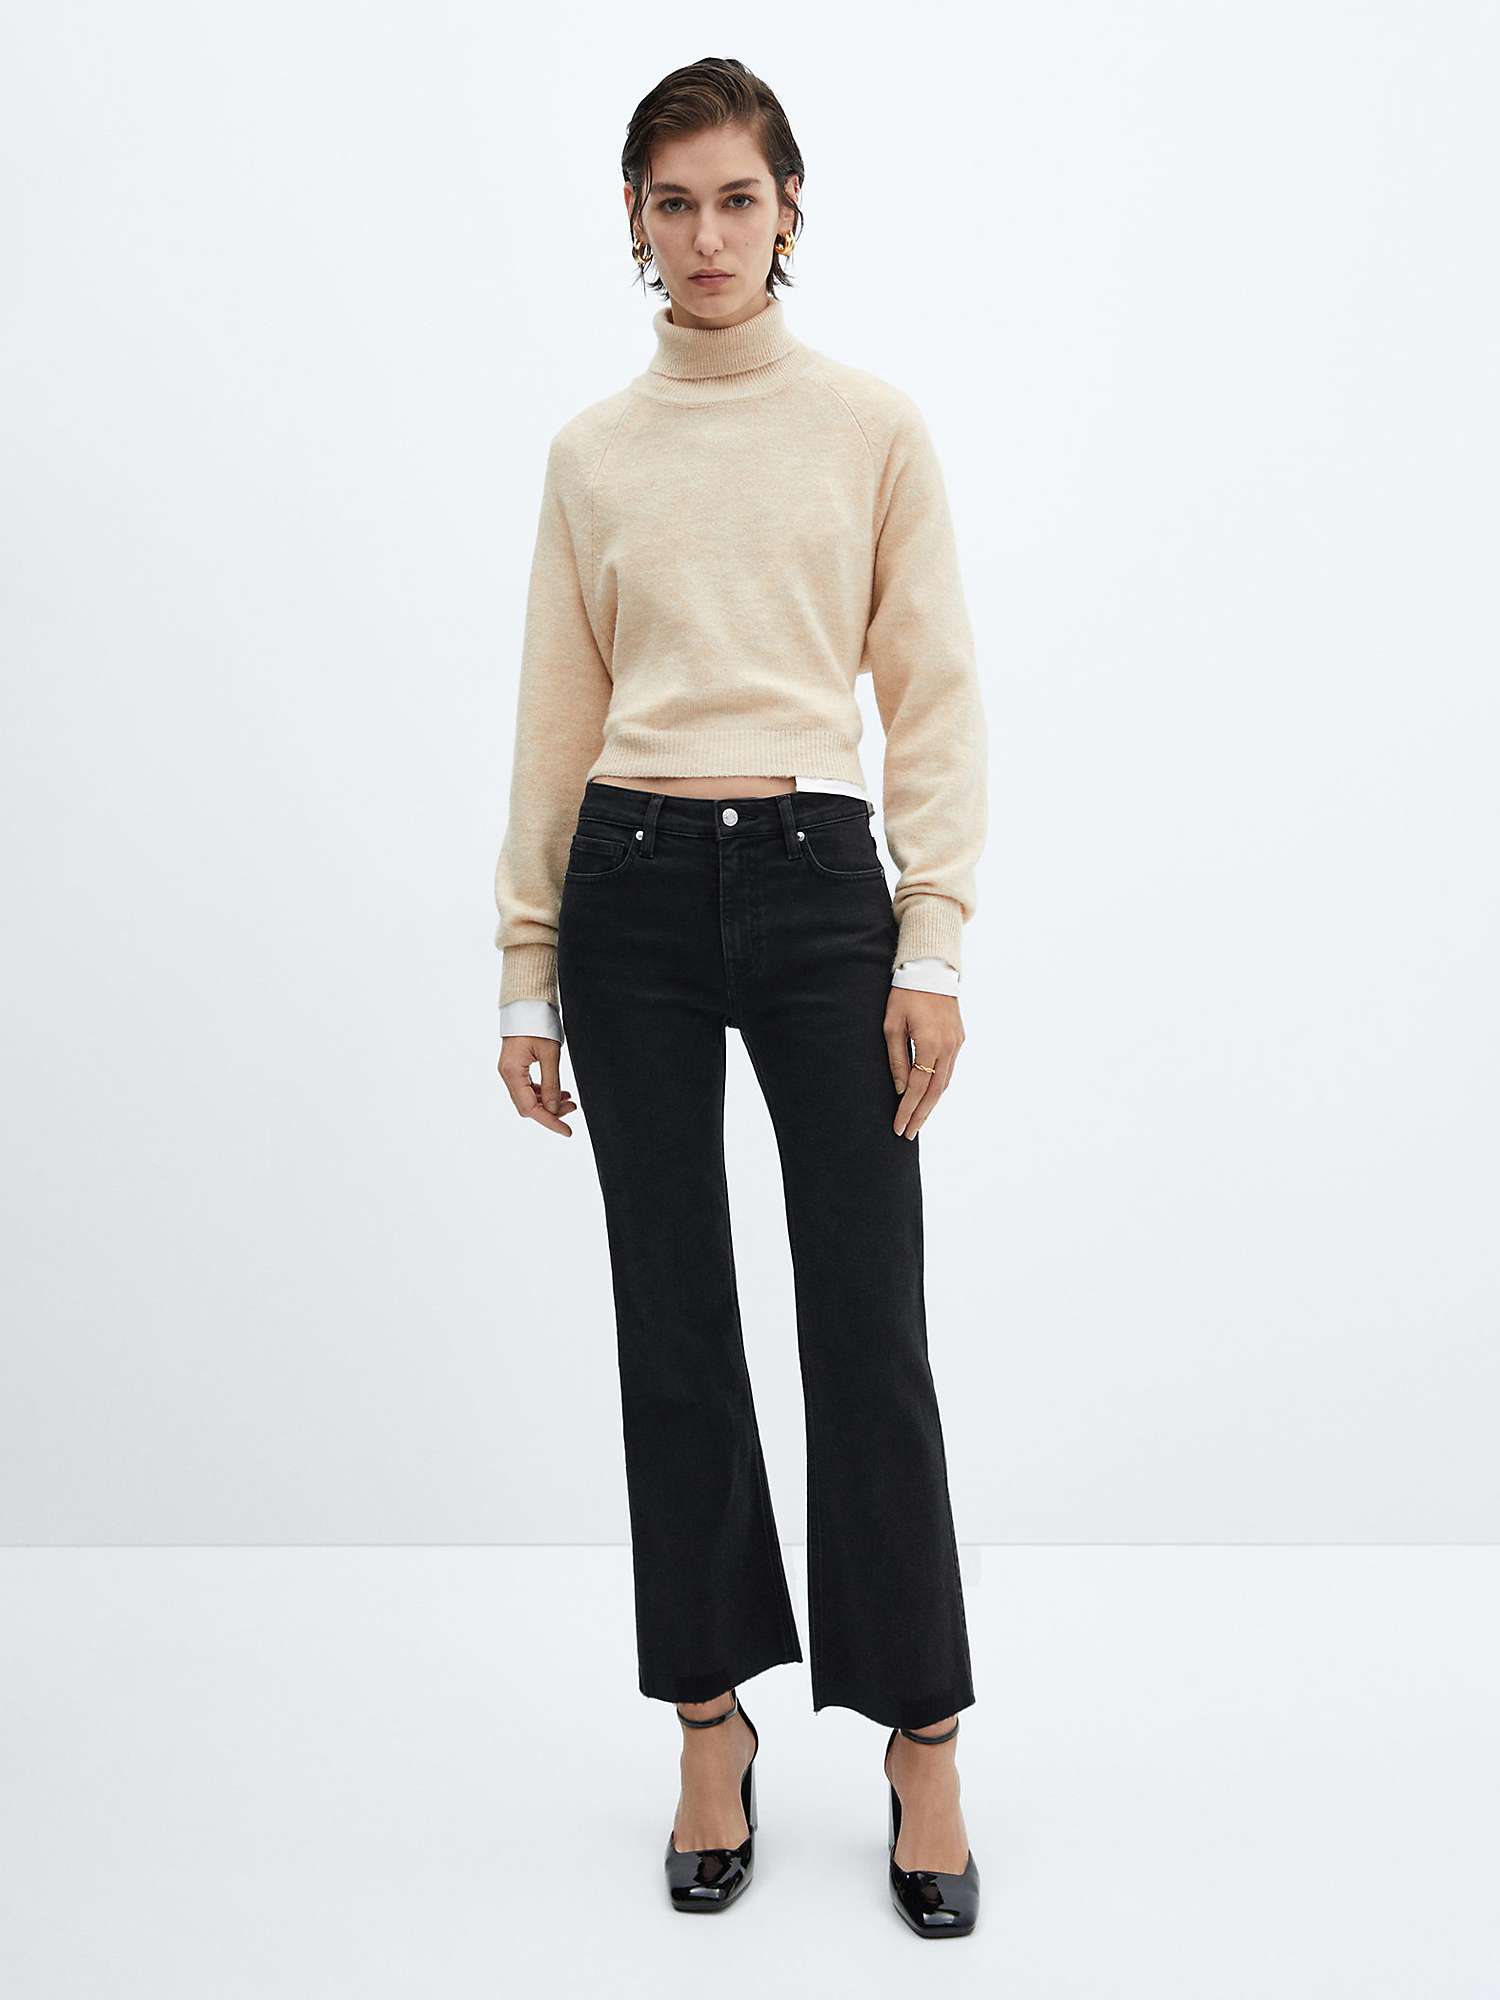 Buy Mango Sienna Cropped Flared Jeans, Open Grey Online at johnlewis.com